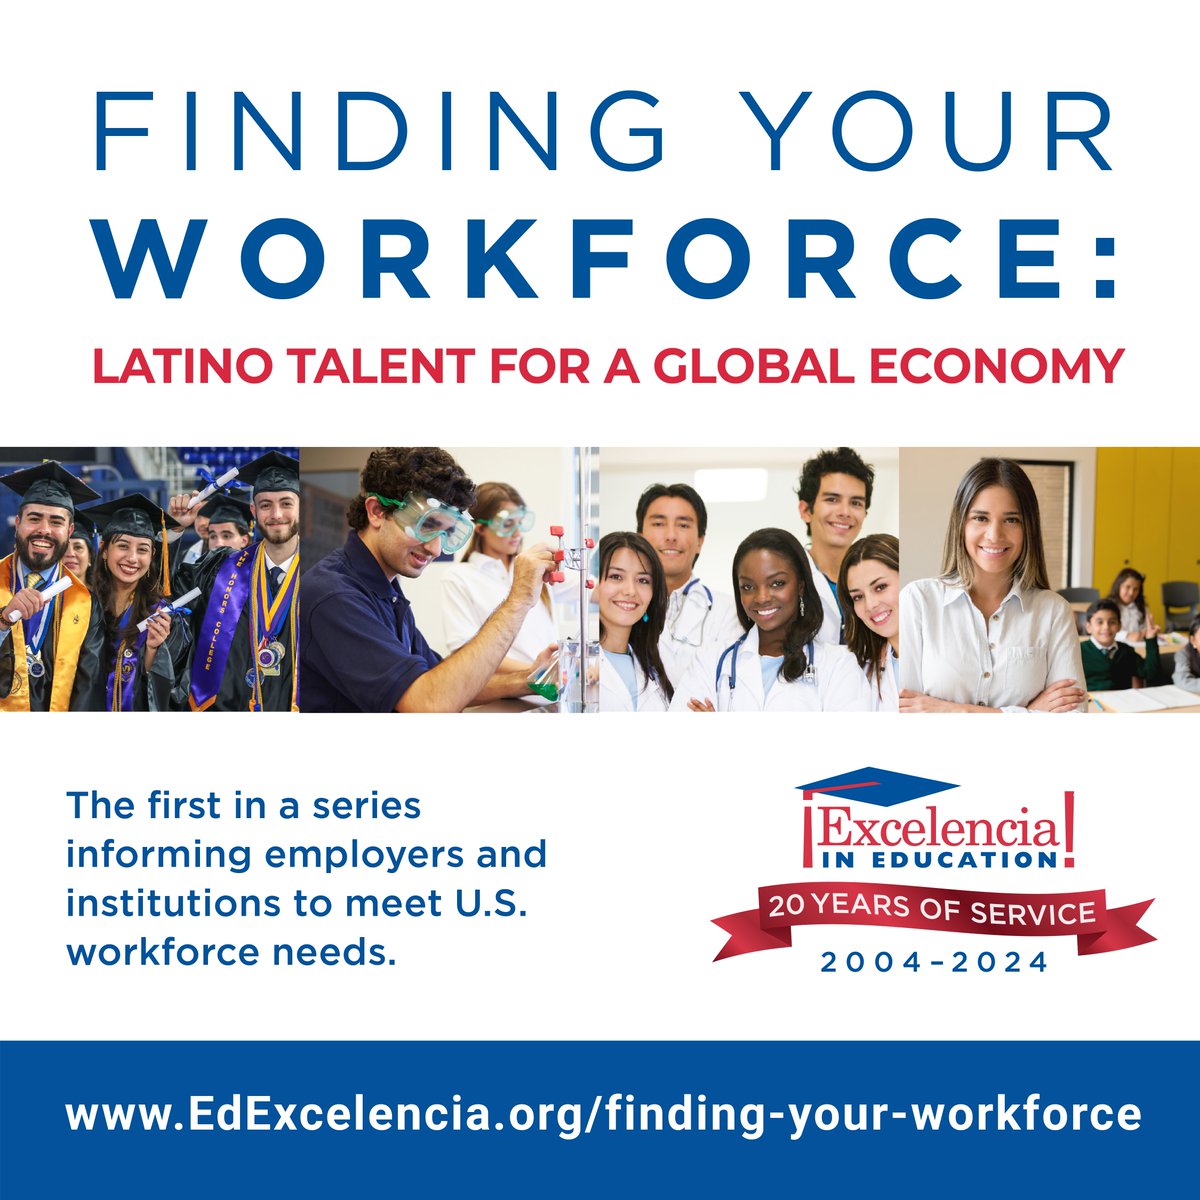 🚨NEW RELEASE🚨@EdExcelencia’s 'Finding Your Workforce: Latino Talent for a Global Economy' provides a roadmap for employers to meet U.S. workforce needs by partnering w/universities to increase the number of Latino graduates. @ds_excelencia See analysis➡️ bit.ly/3SUSZBc